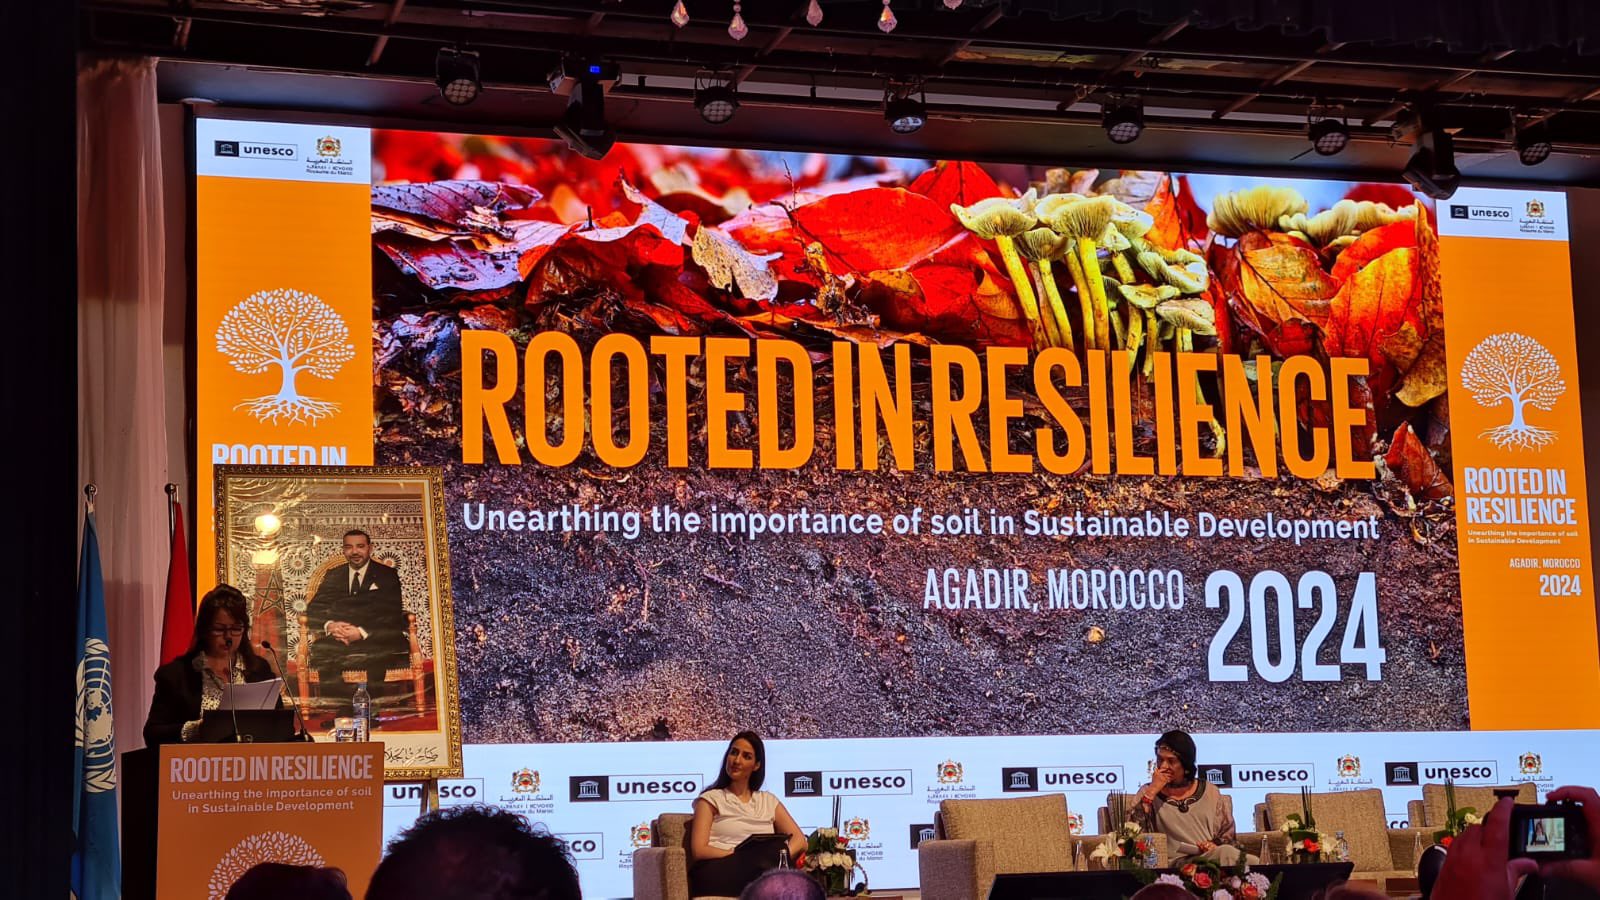 Conference on "Rooted in Resilience: Unearthing the importance of soil in Sustainable Development" kickstarts in Morocco (PHOTO)